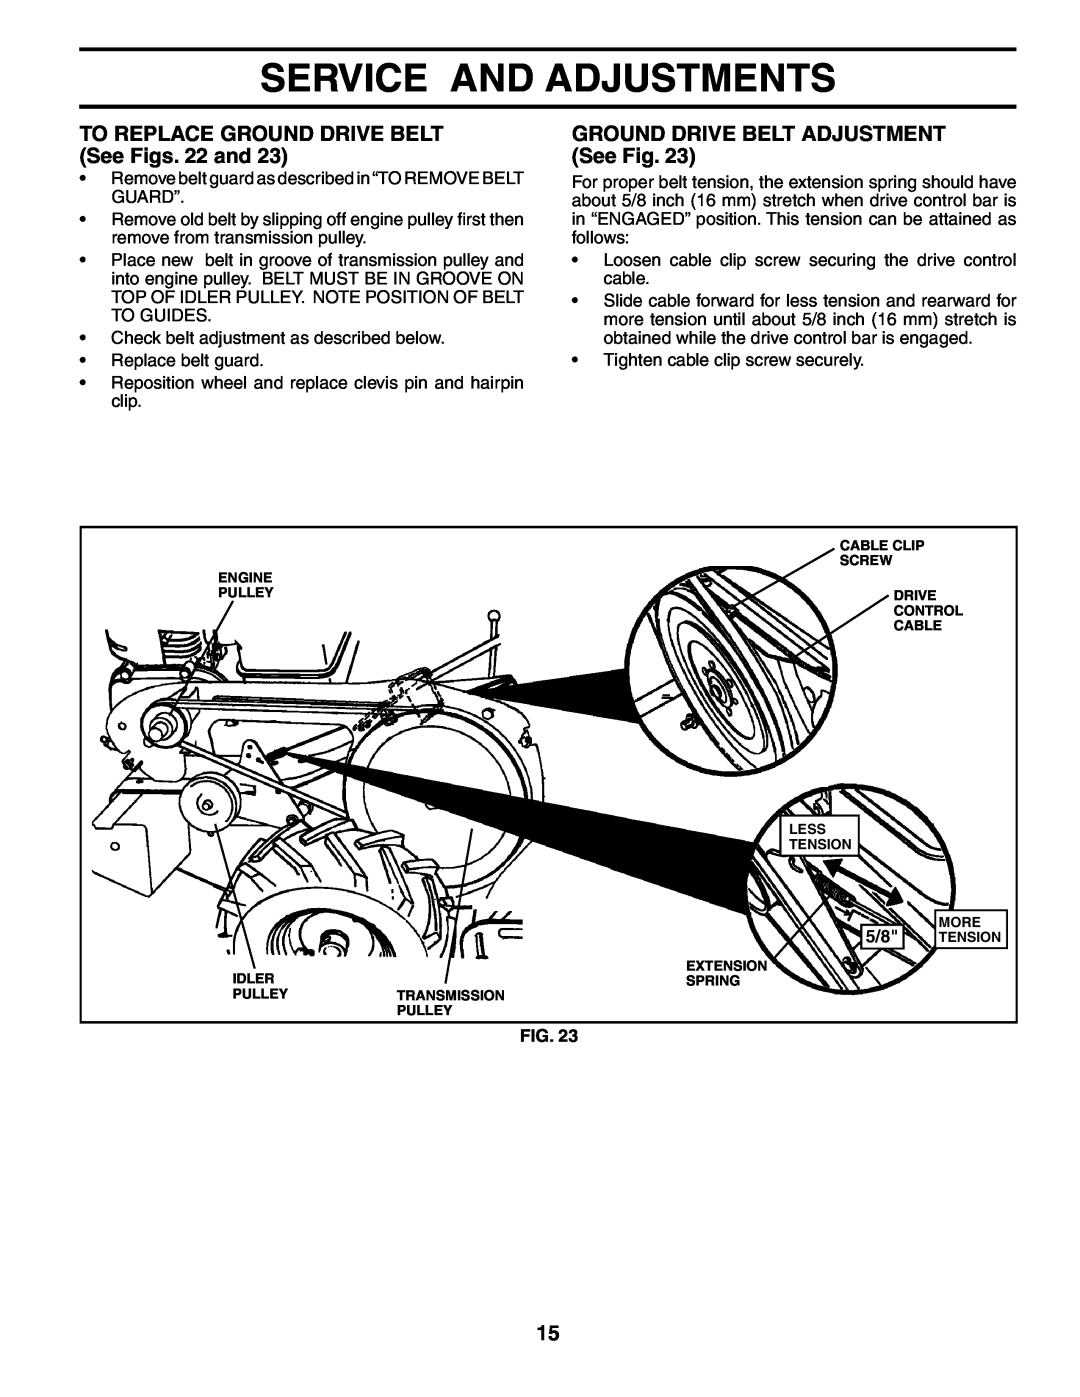 Poulan PRRT65 TO REPLACE GROUND DRIVE BELT See Figs. 22 and, GROUND DRIVE BELT ADJUSTMENT See Fig, Service And Adjustments 